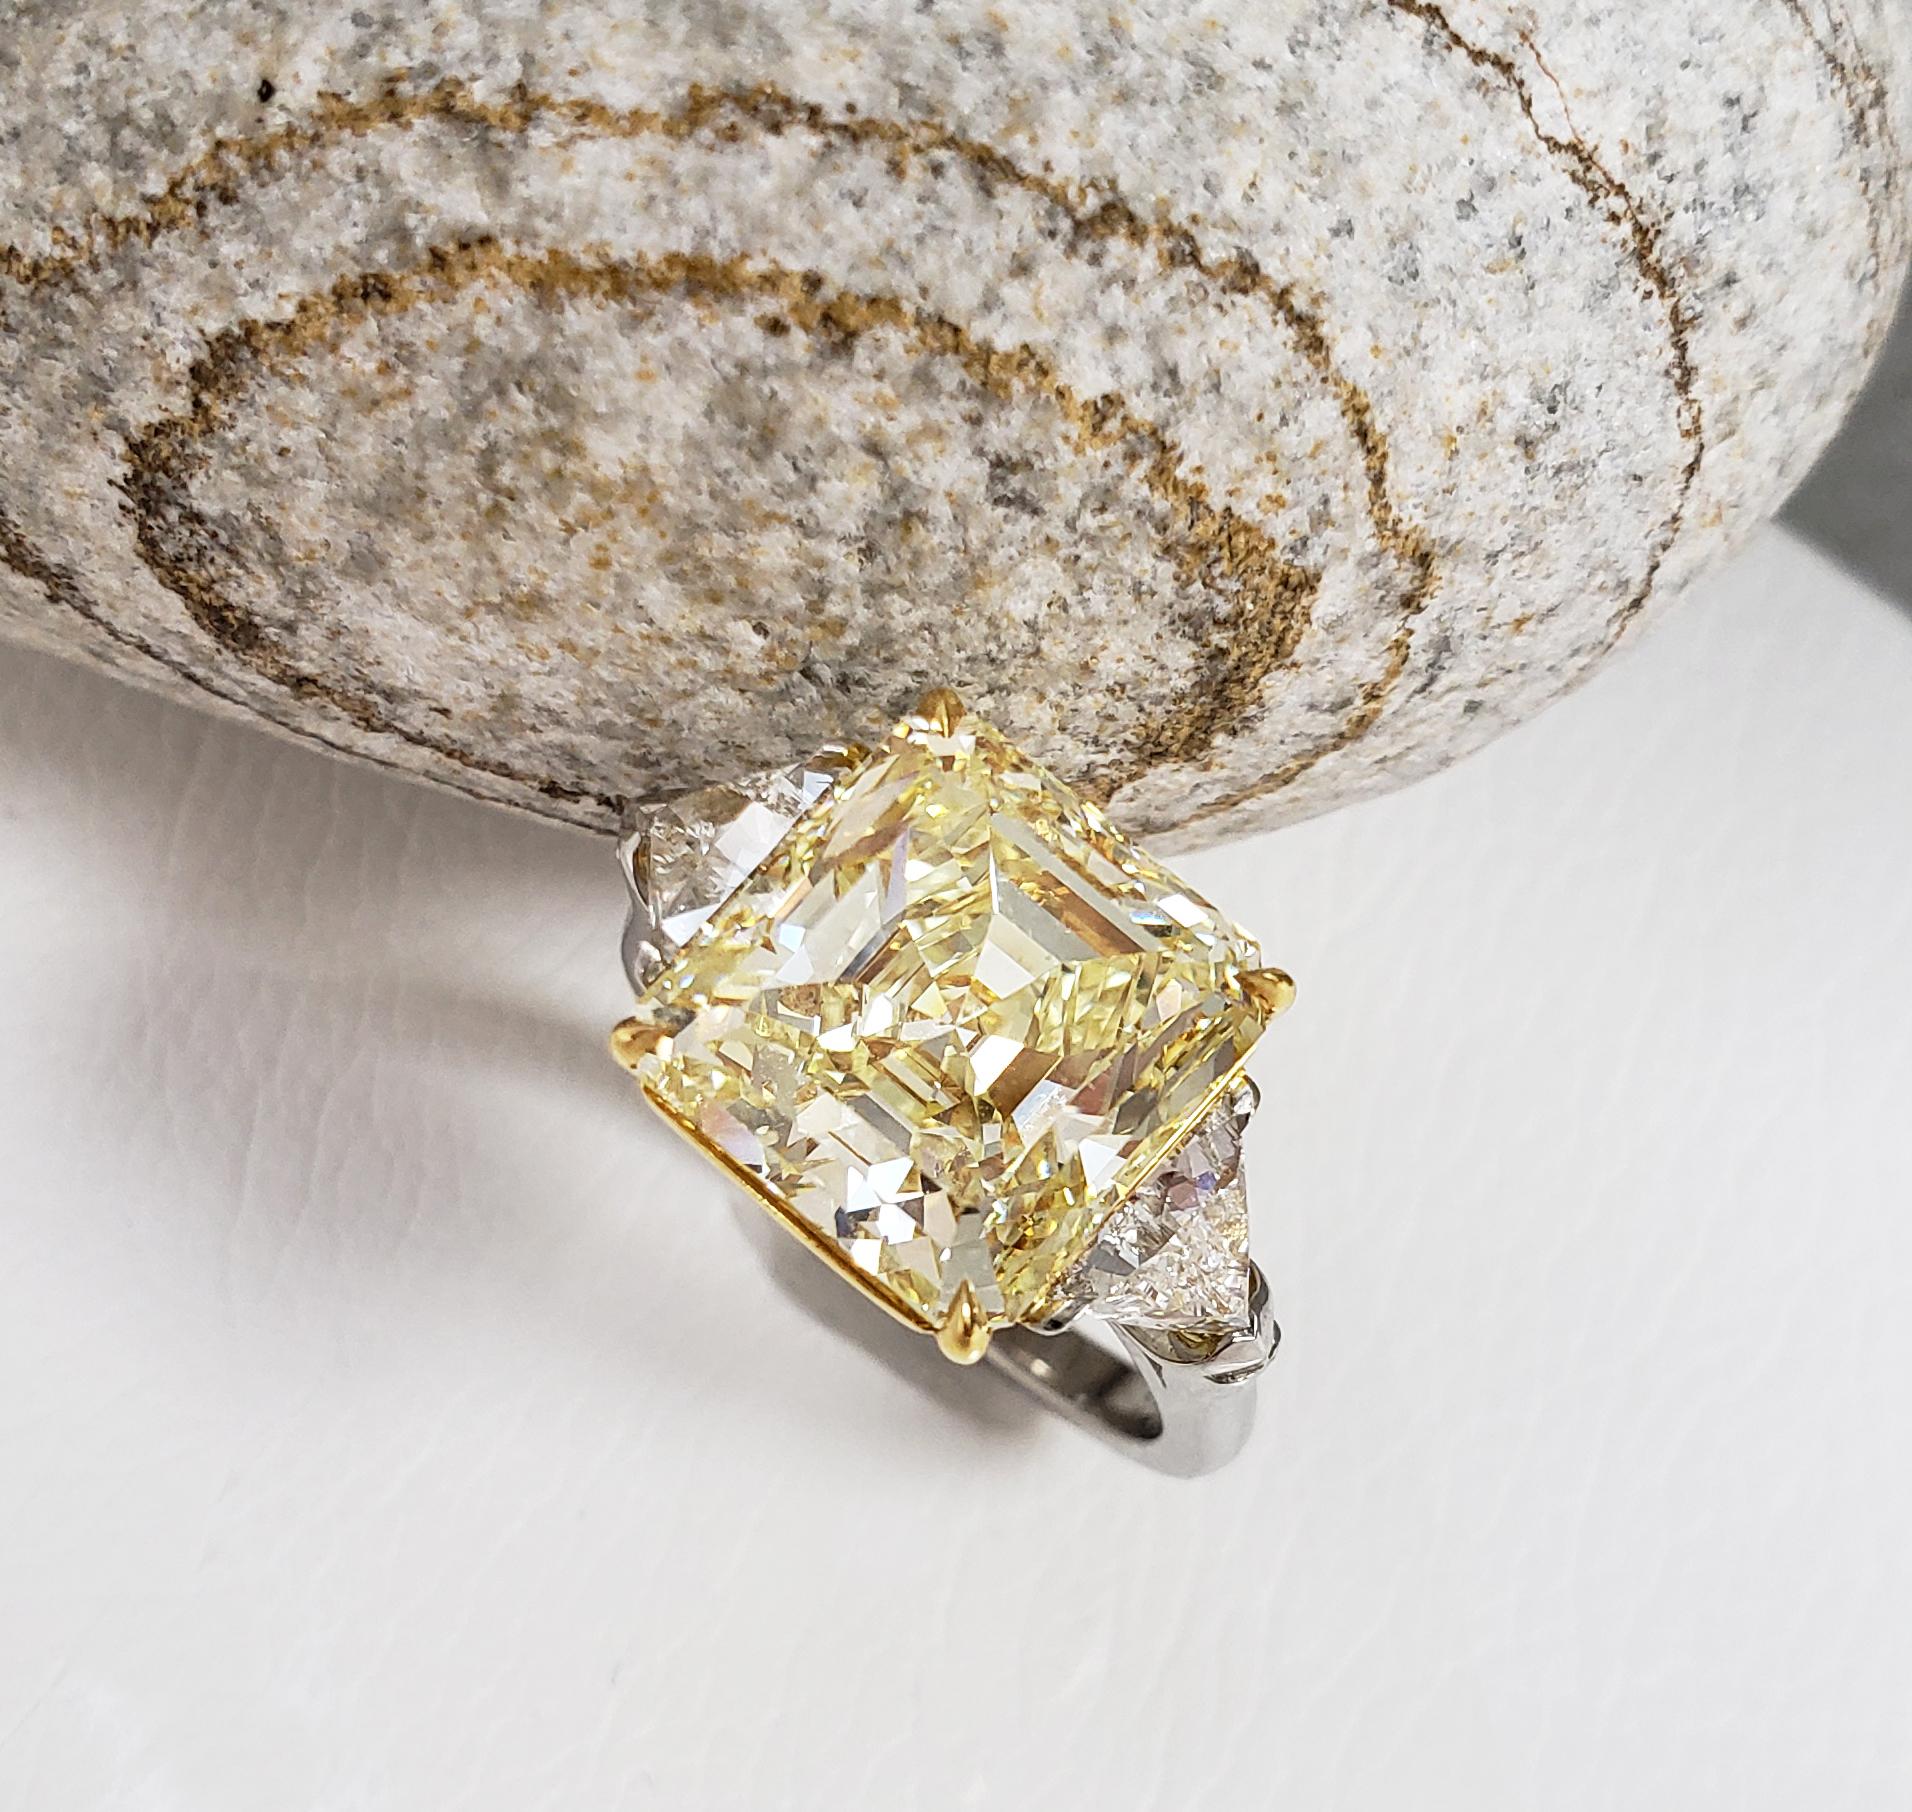 This Beautiful Classic Ring From Scarselli features a 7 carat Fancy Yellow Emerald Cut Diamond with GIA certificate 1182943182 (see certificate picture for more detailed stone's information). The center diamond is accompanied by two white G